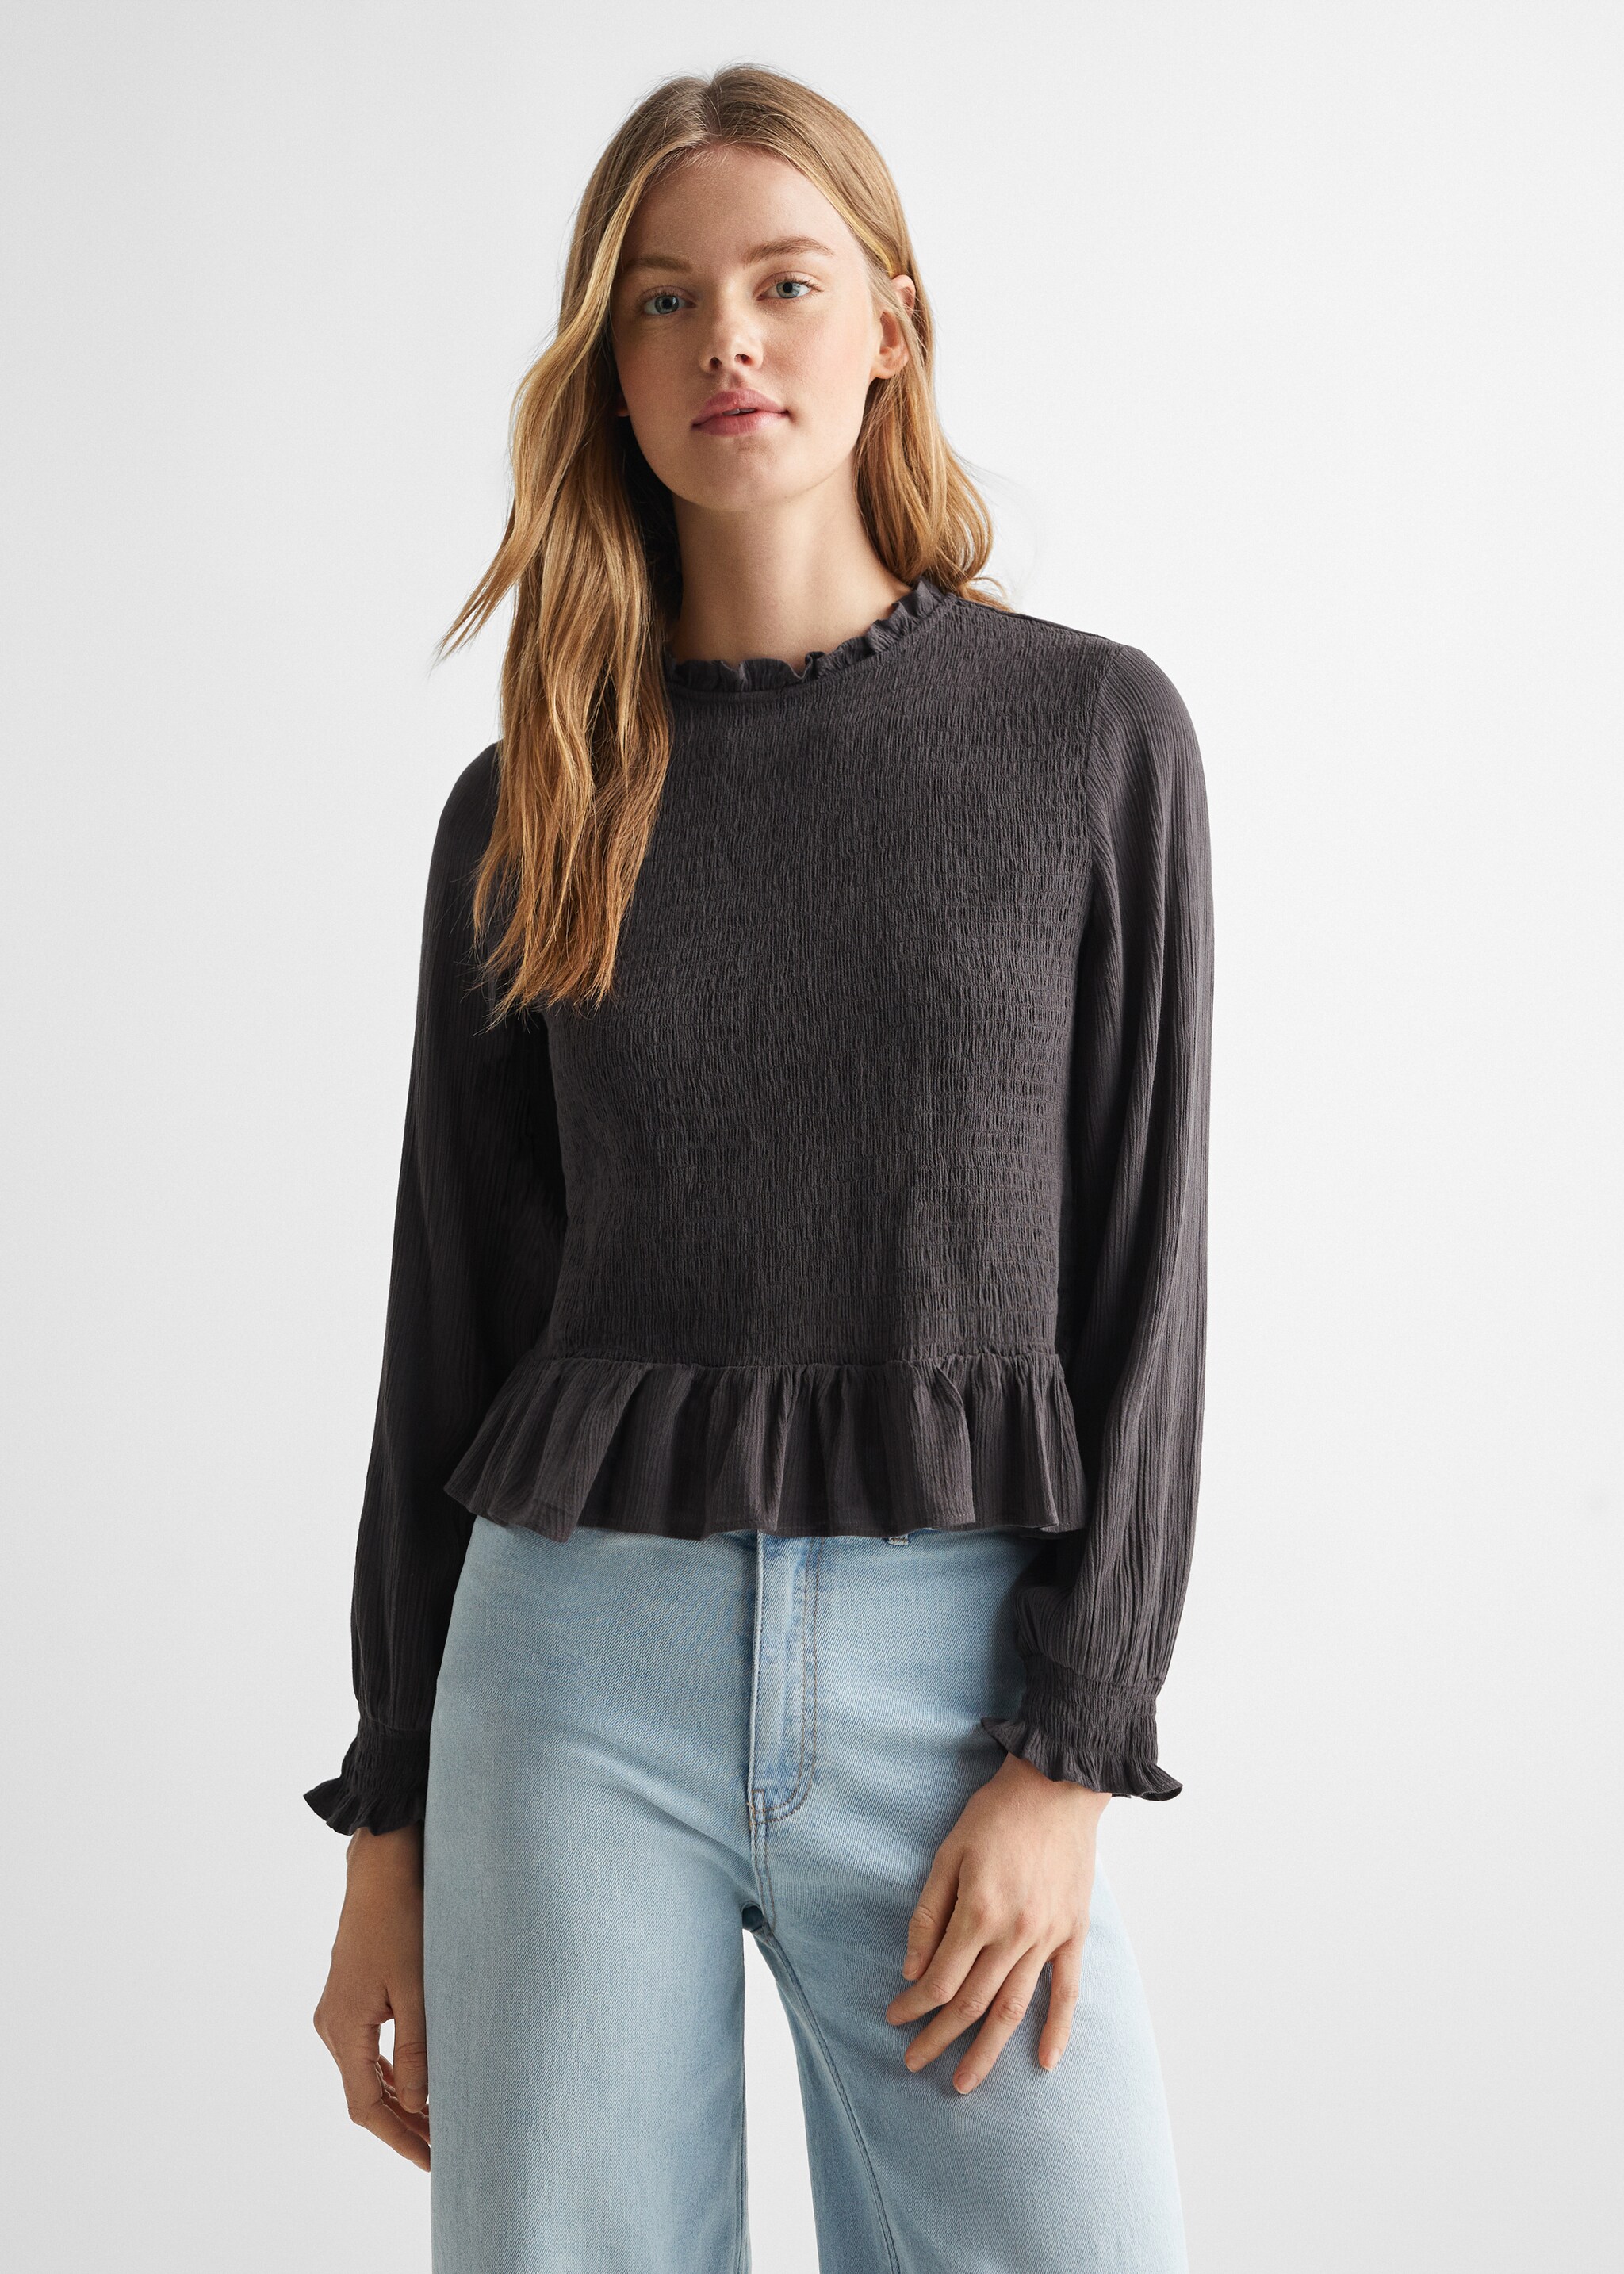 Ruched flowing blouse - Medium plane